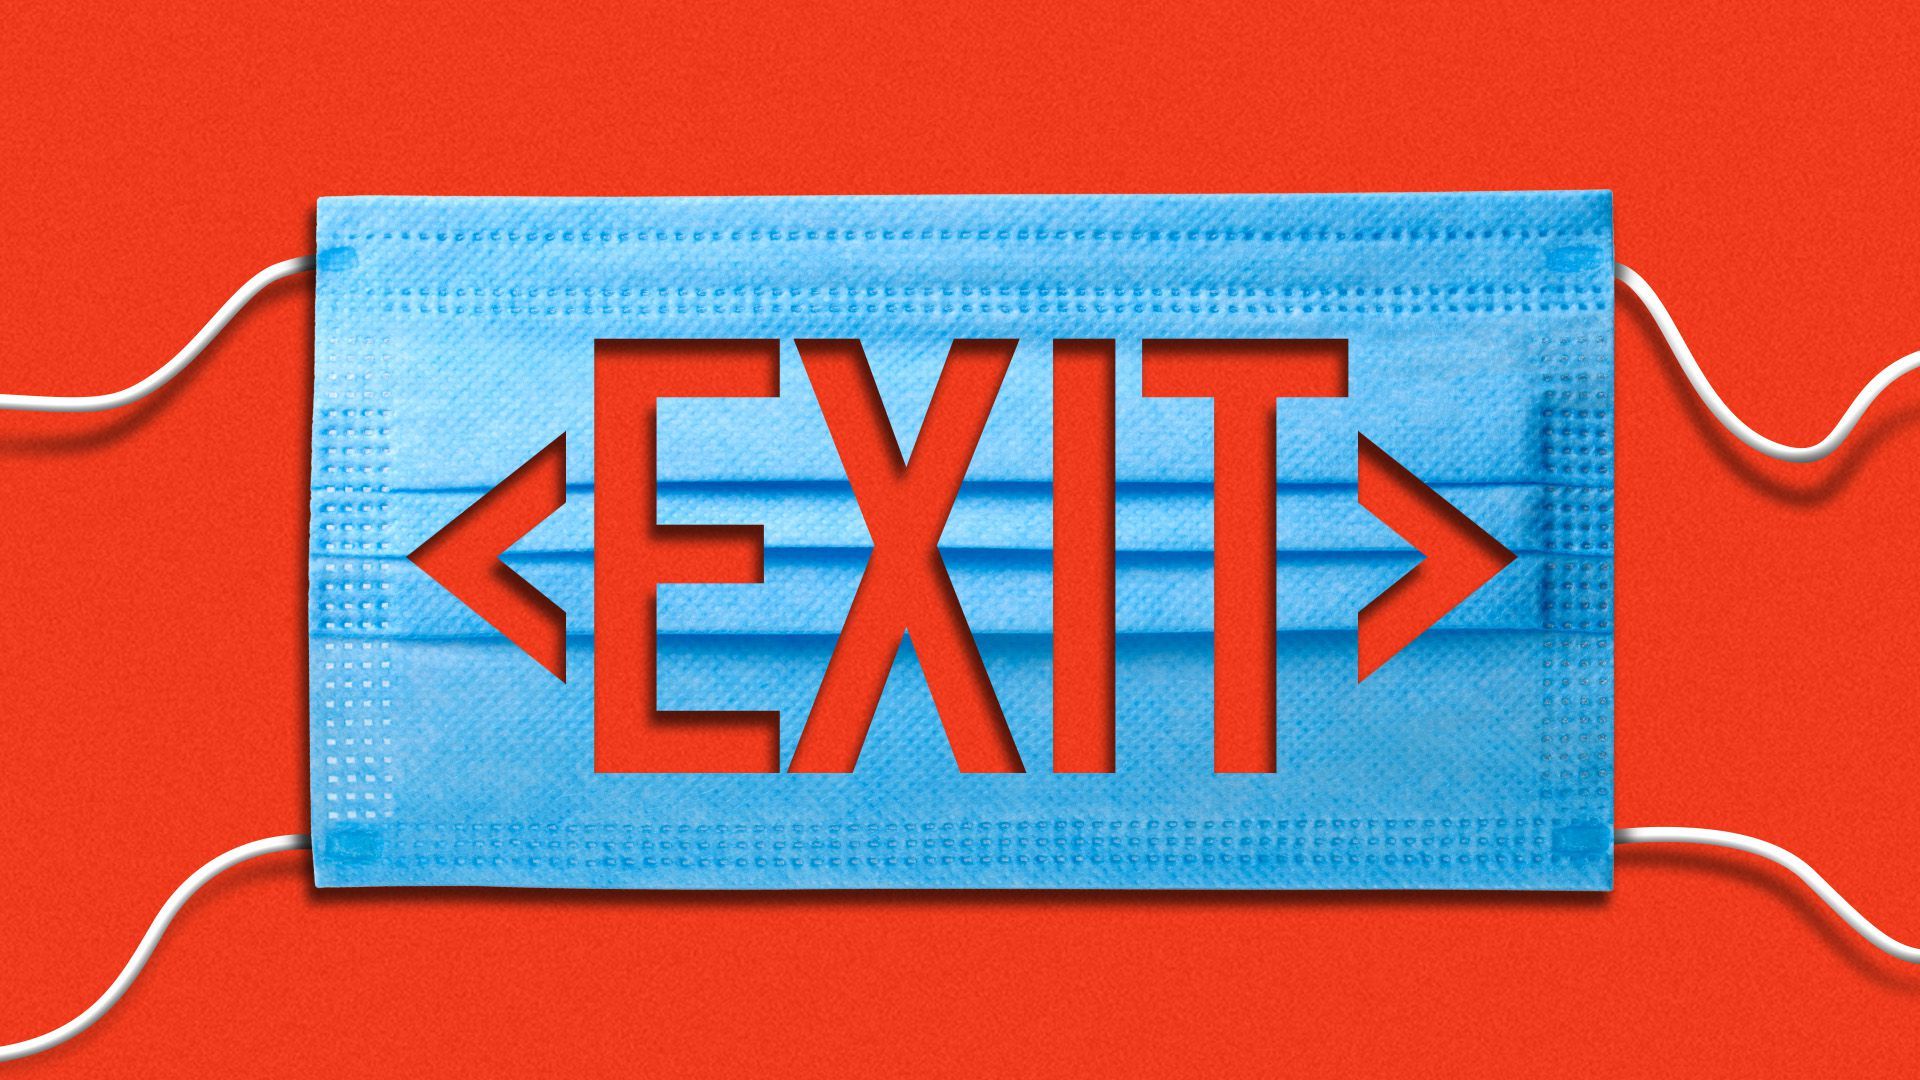 Illustration of a mask with the word "exit" punched out to look like an exit sign.